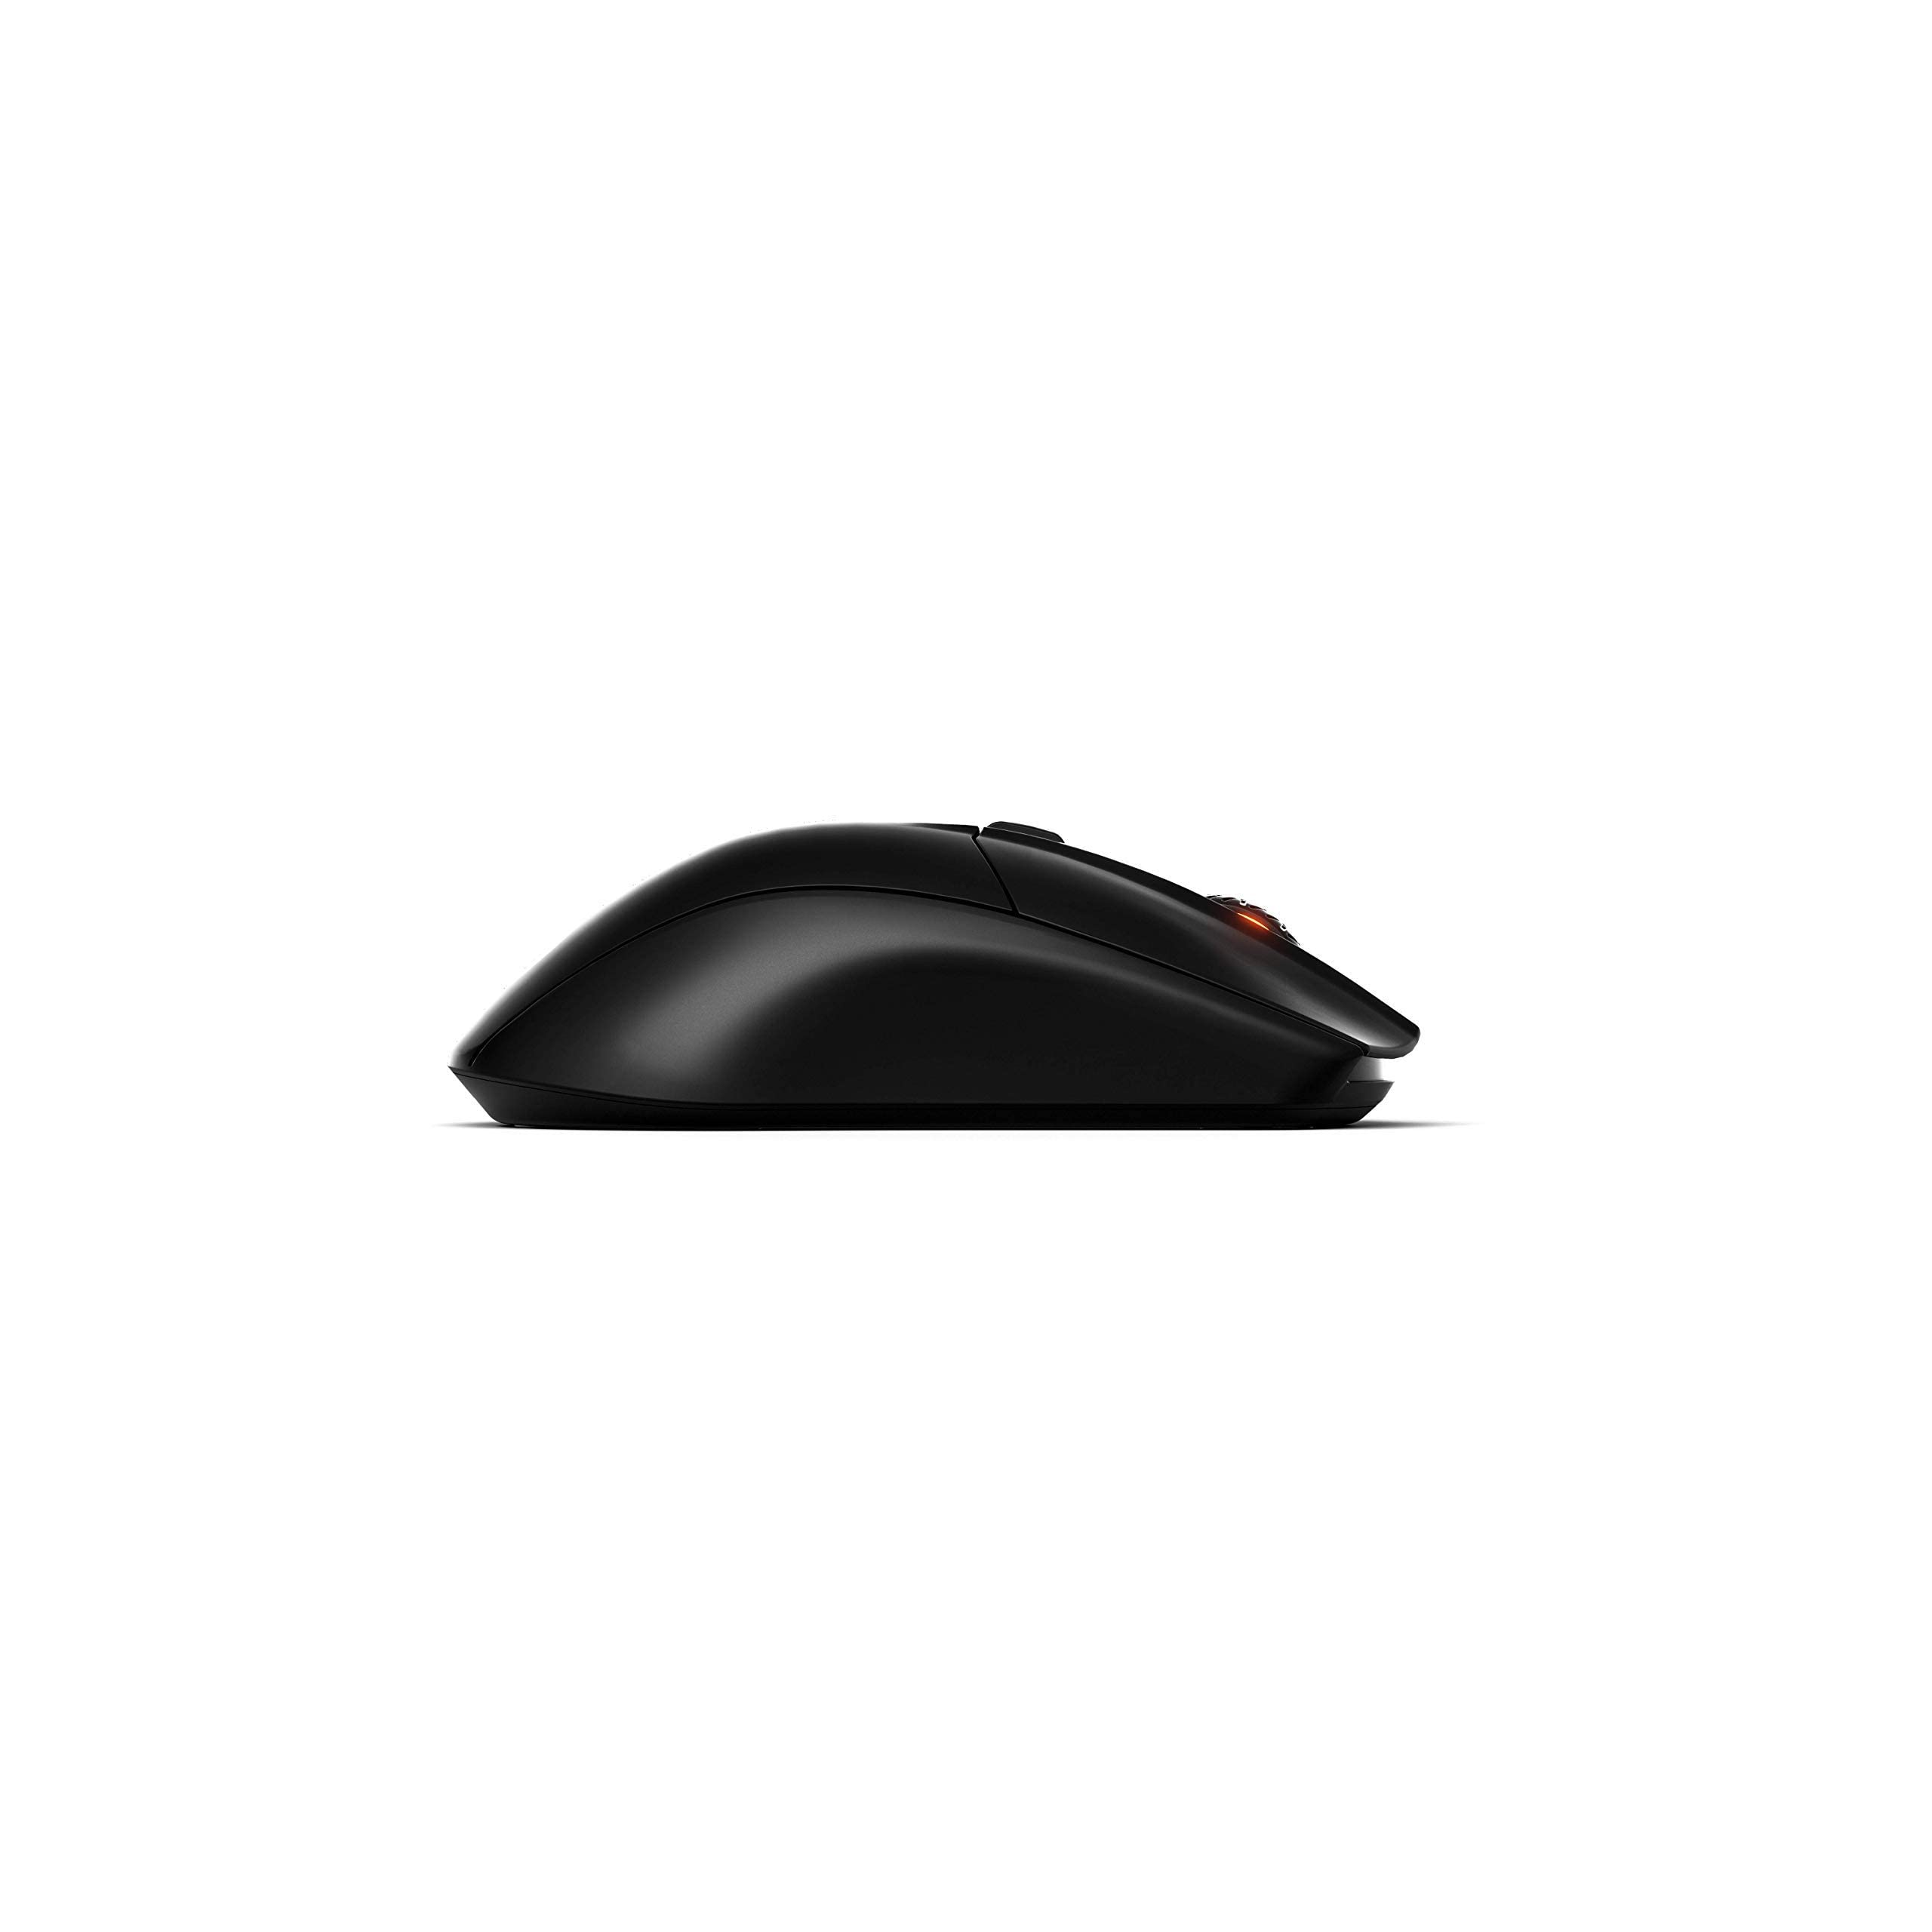 SteelSeries Rival 3 Wireless Gaming Mouse – 400+ Hour Battery Life – Dual Wireless 2.4 GHz and Bluetooth 5.0 – 60 Million Clicks – 18,000 CPI TrueMove Air Optical Sensor,Black